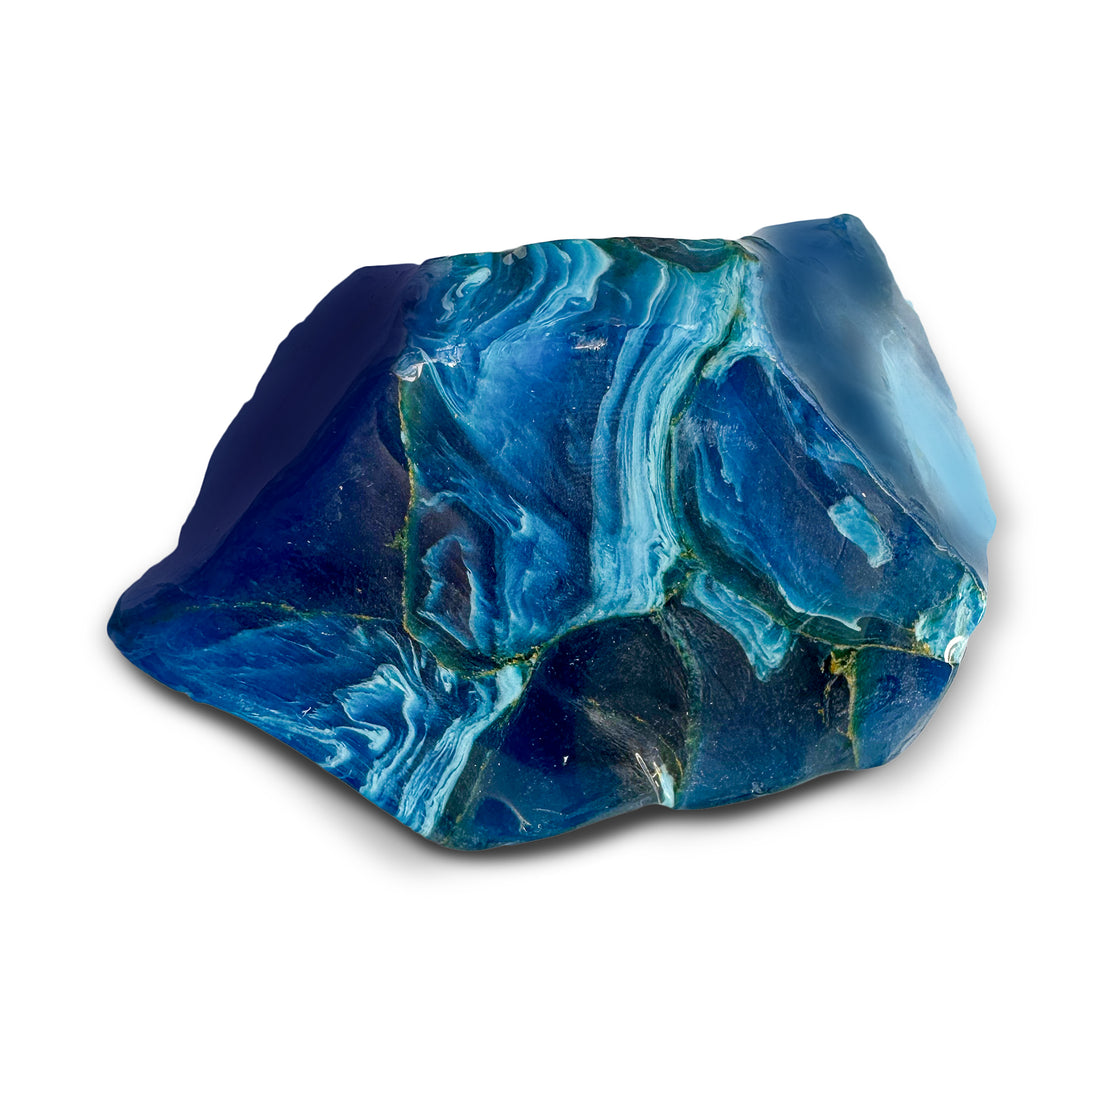 Deep Blue Agate SoapRock® - royal blue with lighter blue marbled soap with a line of gold throughout - made to look like an actual rock!